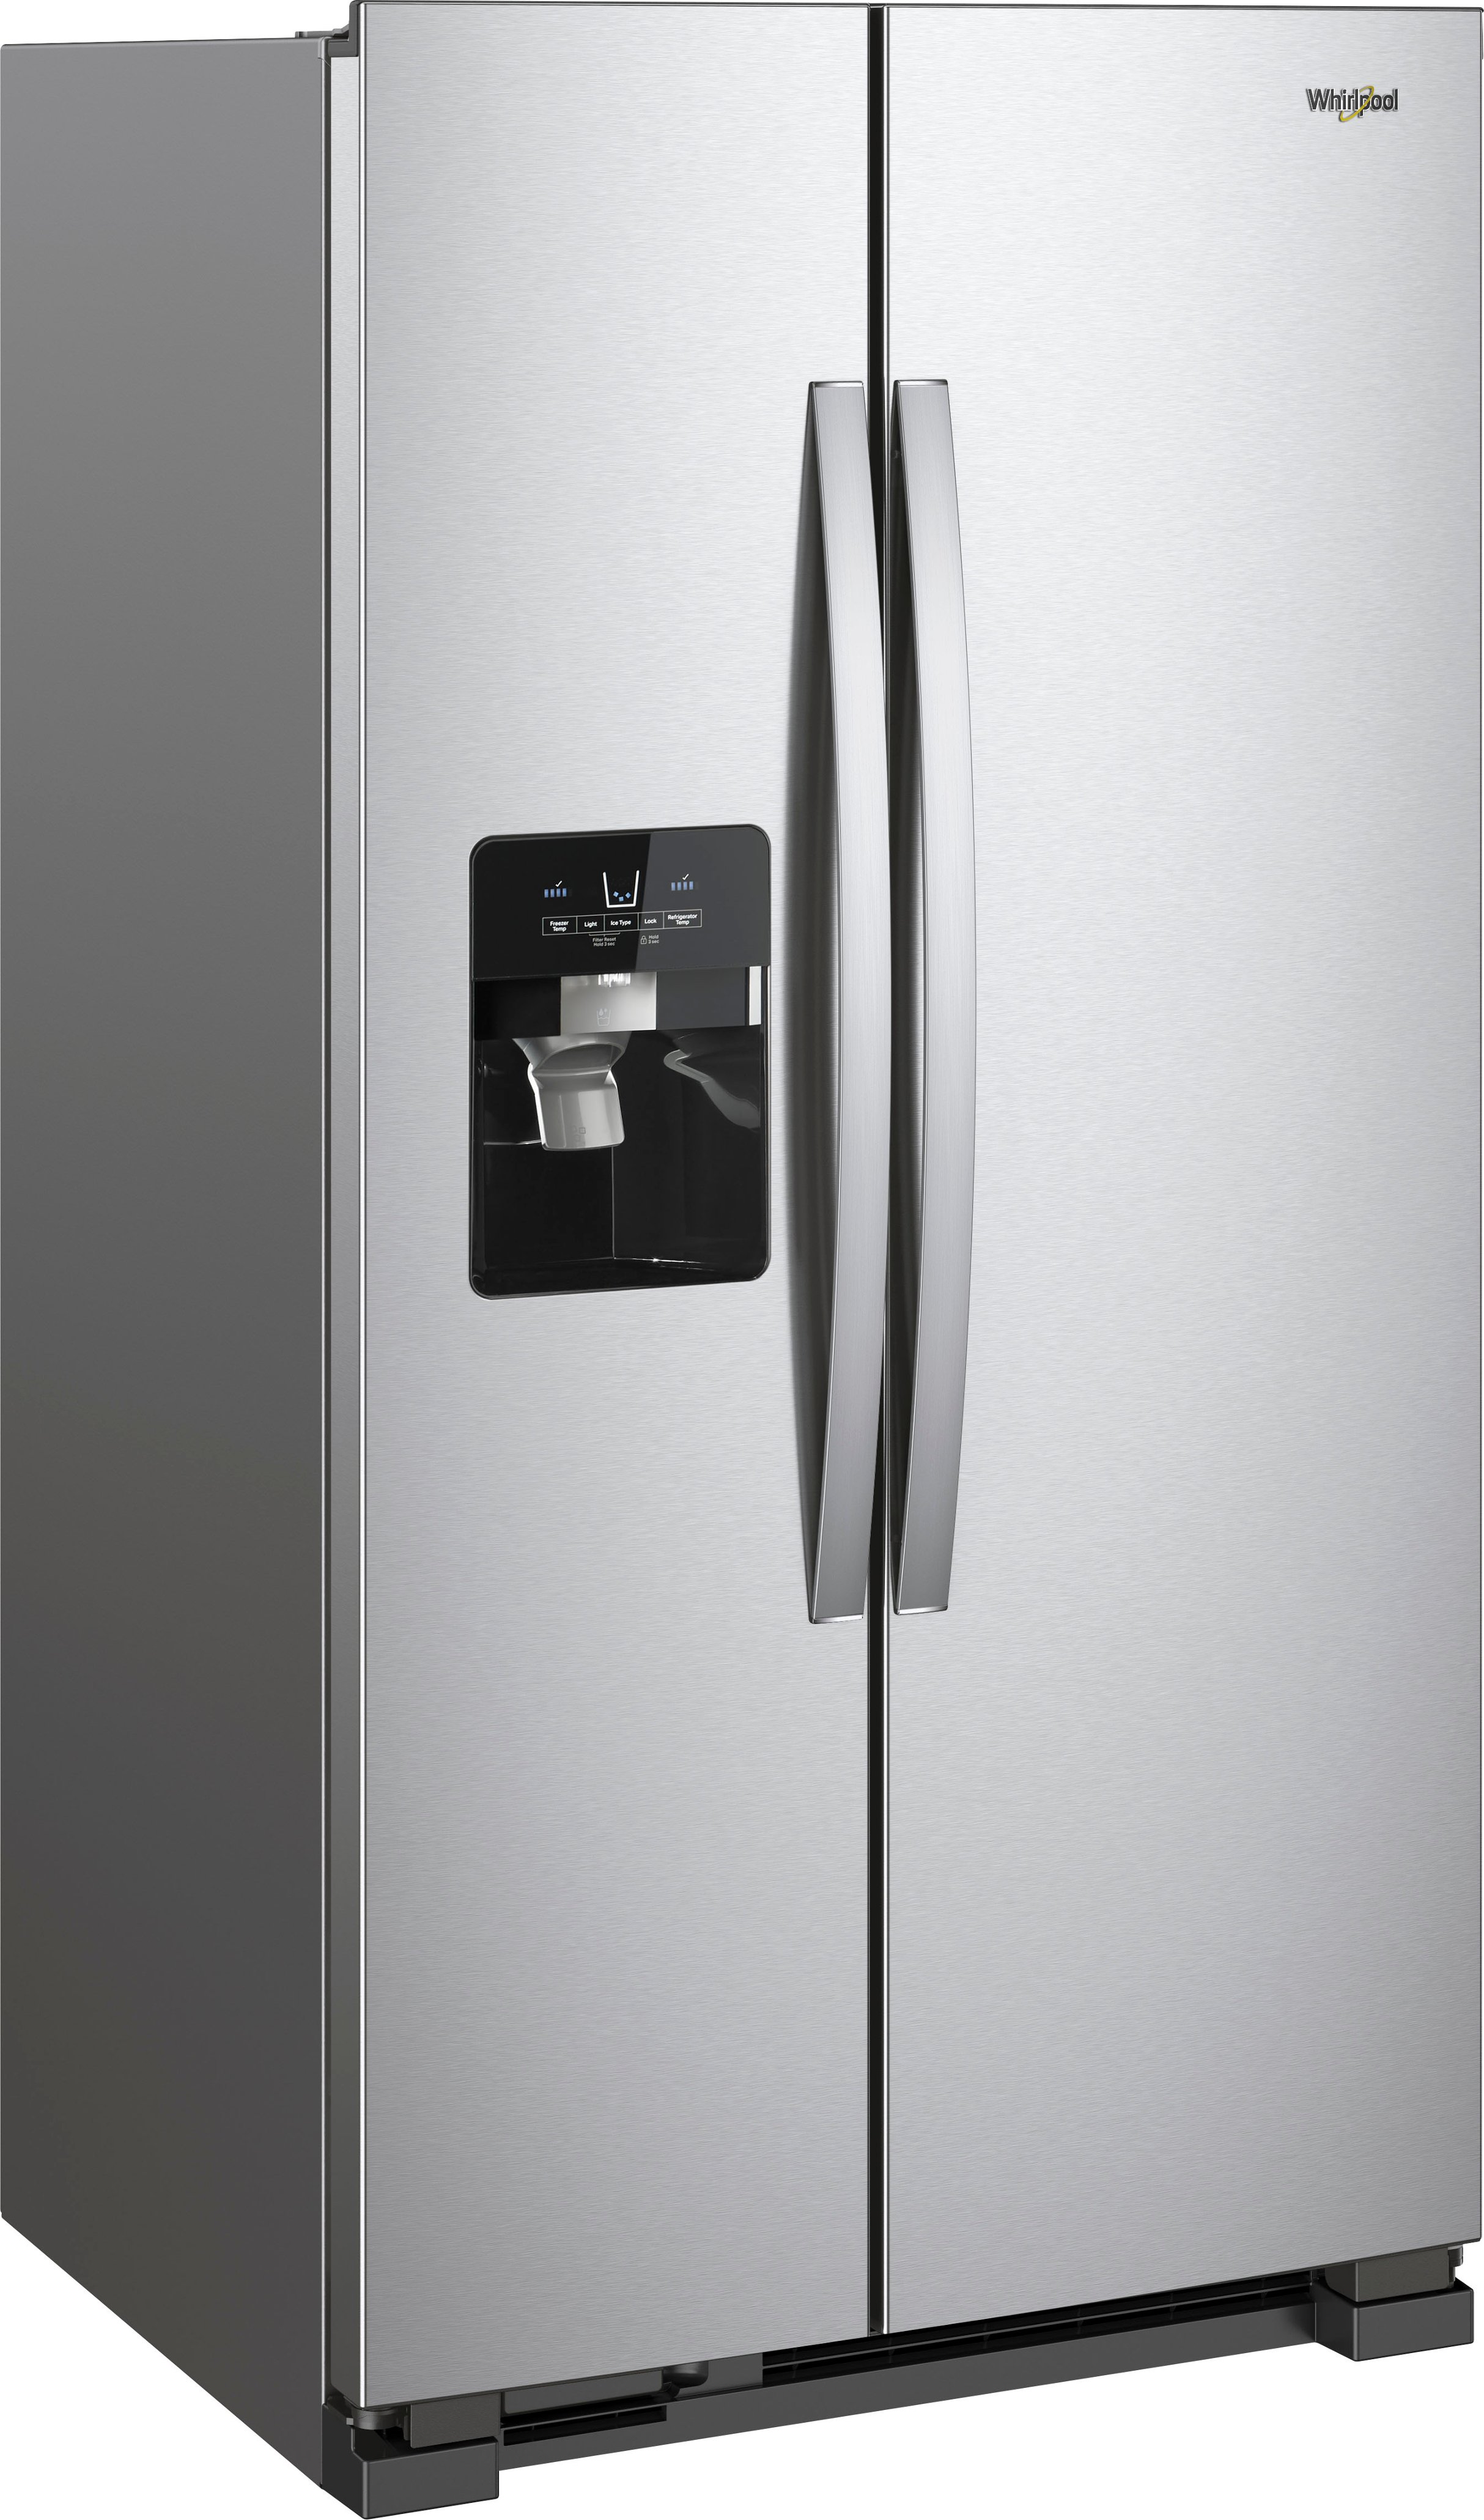 Angle View: Bosch - 300 Series 20.2 Cu. Ft. Side-by-Side Counter-Depth Refrigerator - Stainless Steel